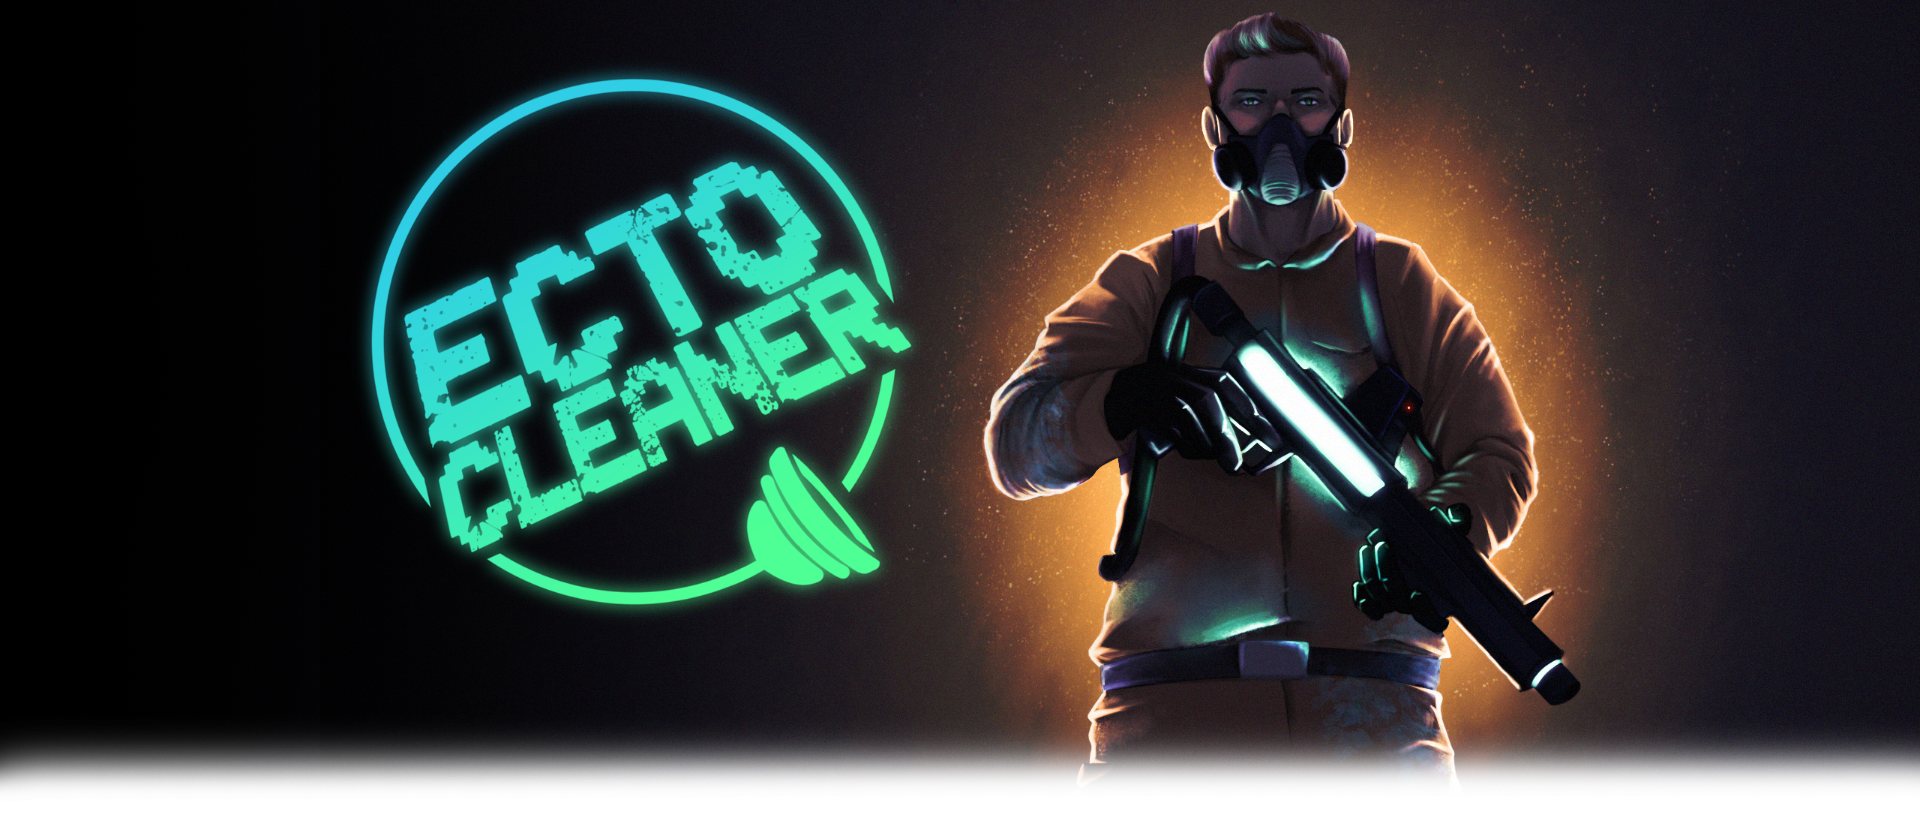 EctoCleaner